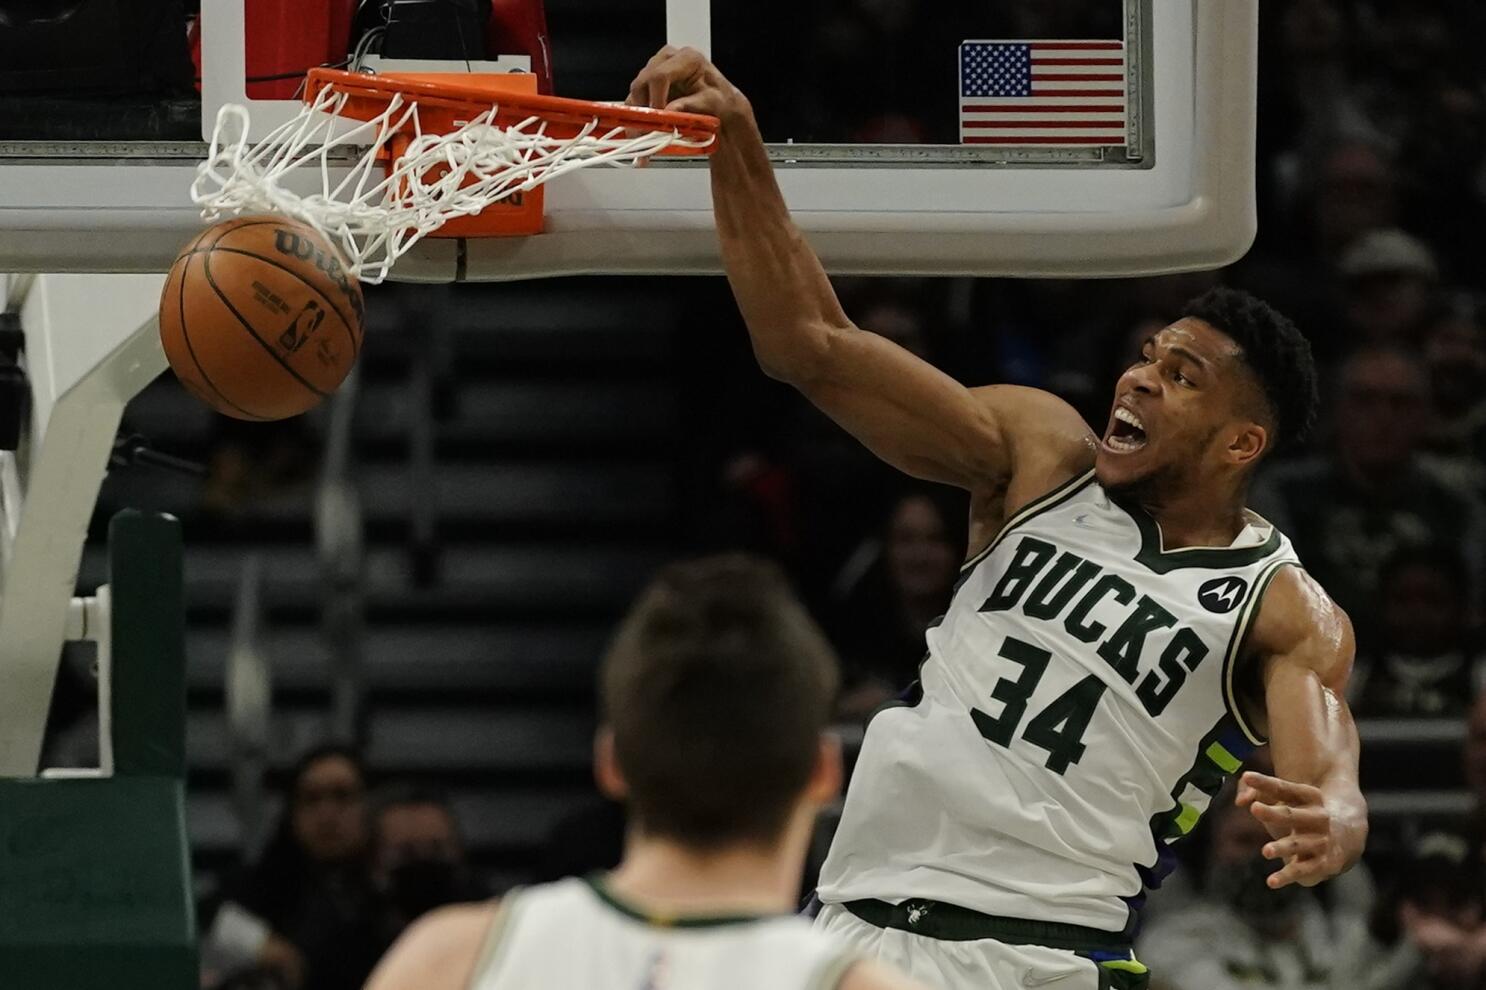 Bucks beat Hornets for second time in 3 days